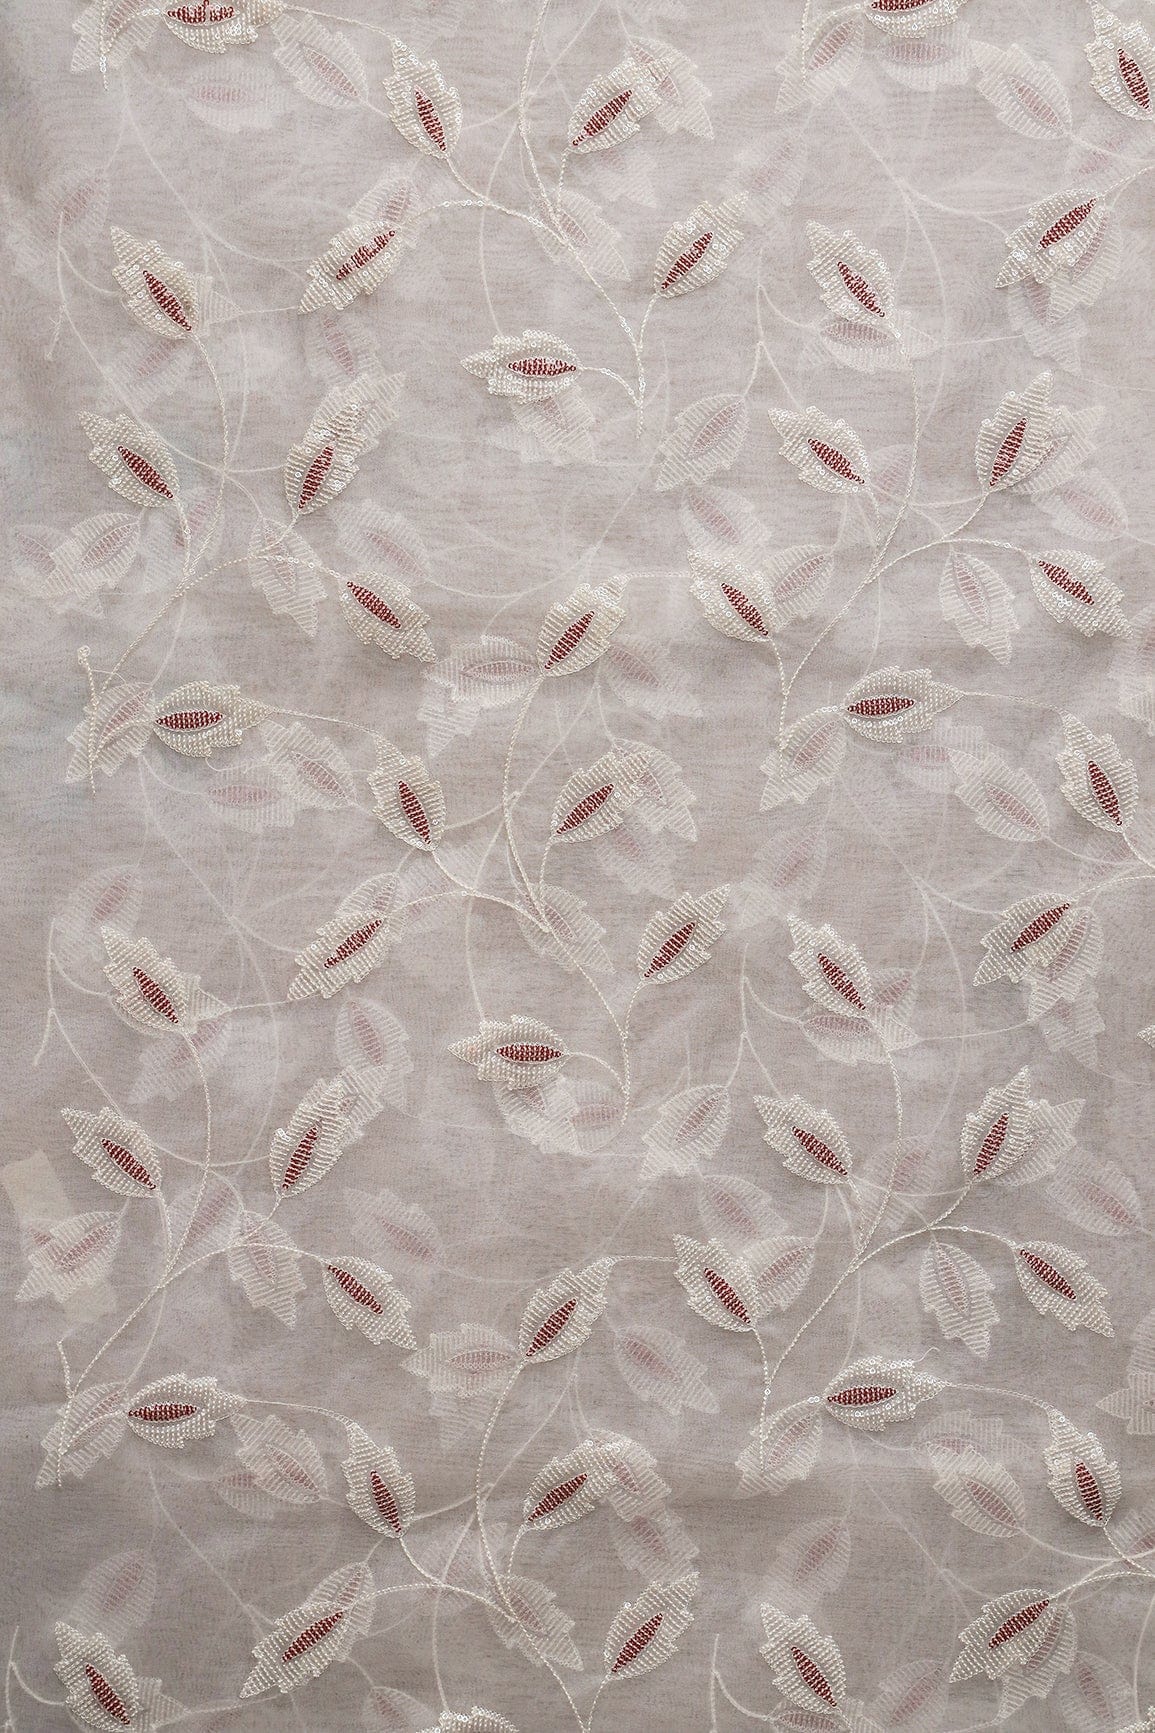 doeraa Embroidery Fabrics Copy of 4 Meter Cut Piece Of White Thread Floral Embroidery On White Dyeable Organza Fabric